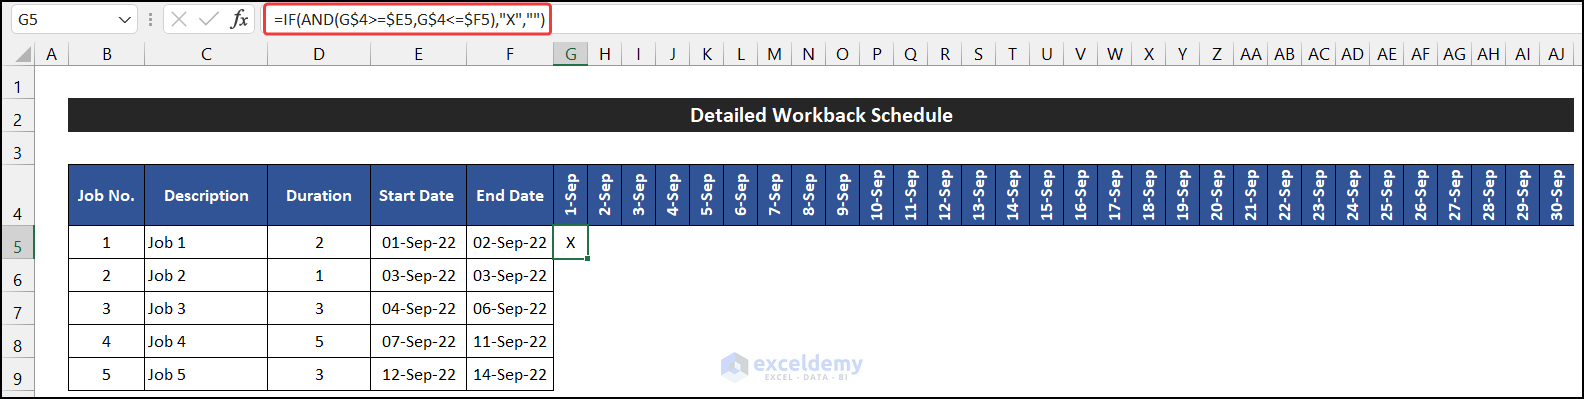 Getting the value using the IF and AND function to create a workback schedule